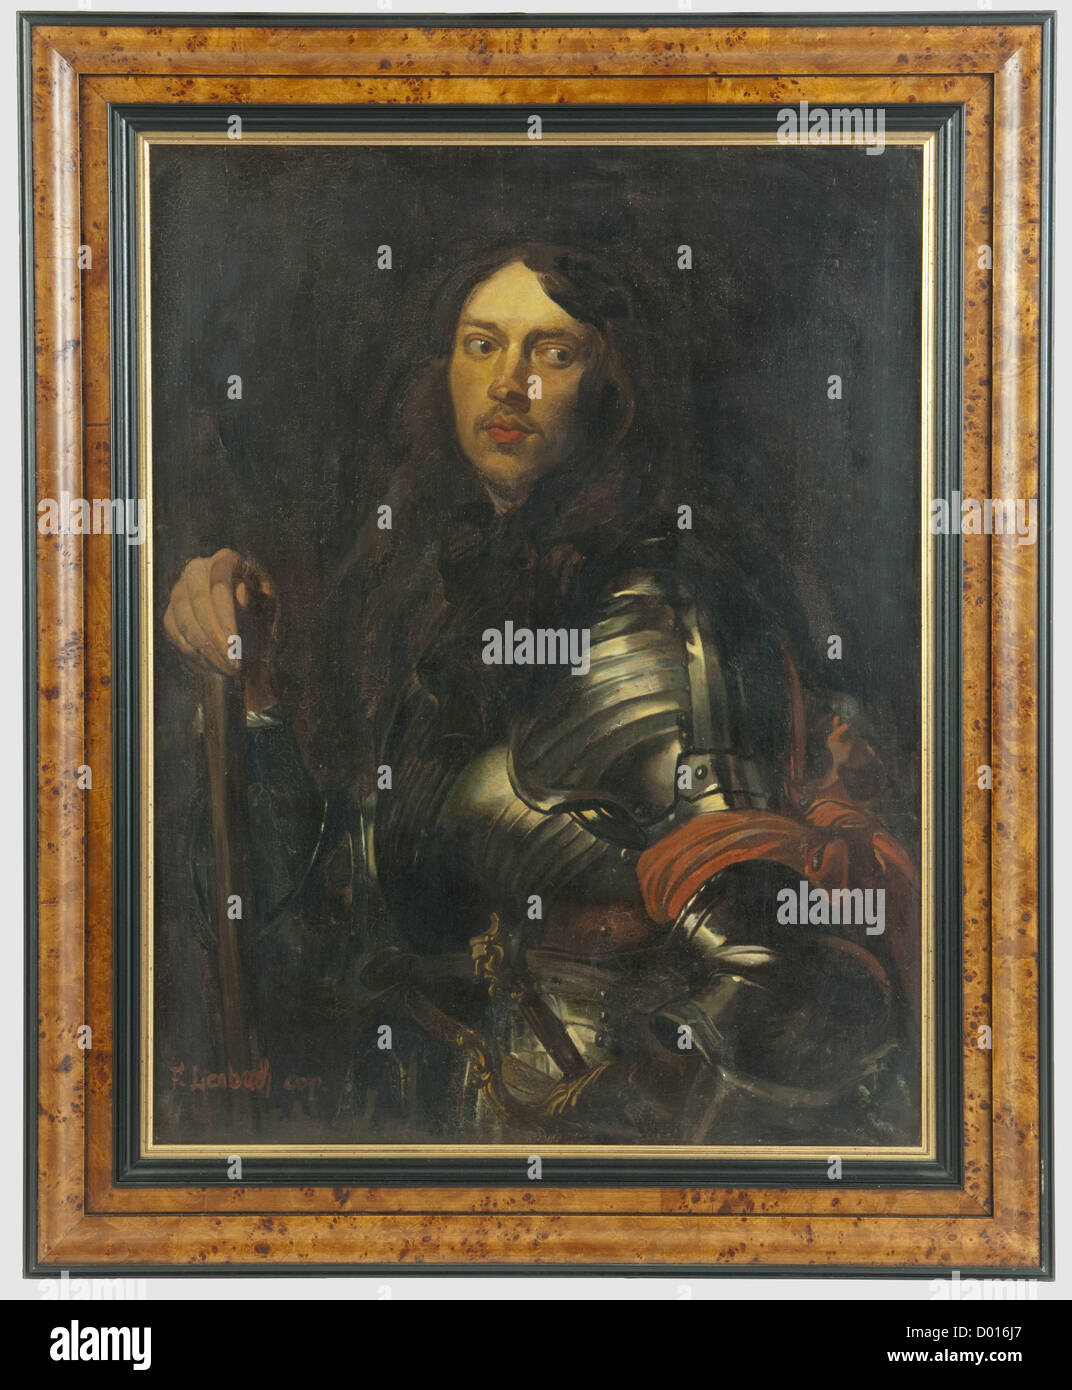 A portrait of Count Johann Baptist Arco (1650 - 1715), Half portrait of the Bavarian field marshal in armour with a marshal's baton. Oil on canvas 70 x 90 cm, inscribed 'F.Lenbach cop.' at the lower left. Recently framed. Framed dimensions 91 x 110 cm. High quality copy of the painting by Lenbach. The individual portrayed held overall command of all the Bavarian prince elector's army units from 1694, and in 1702 was promoted to field marshal, people, 18th century, Bavaria, Bavarian, German, Germany, Southern Germany, the South of Germany, object, objects, still, Stock Photo